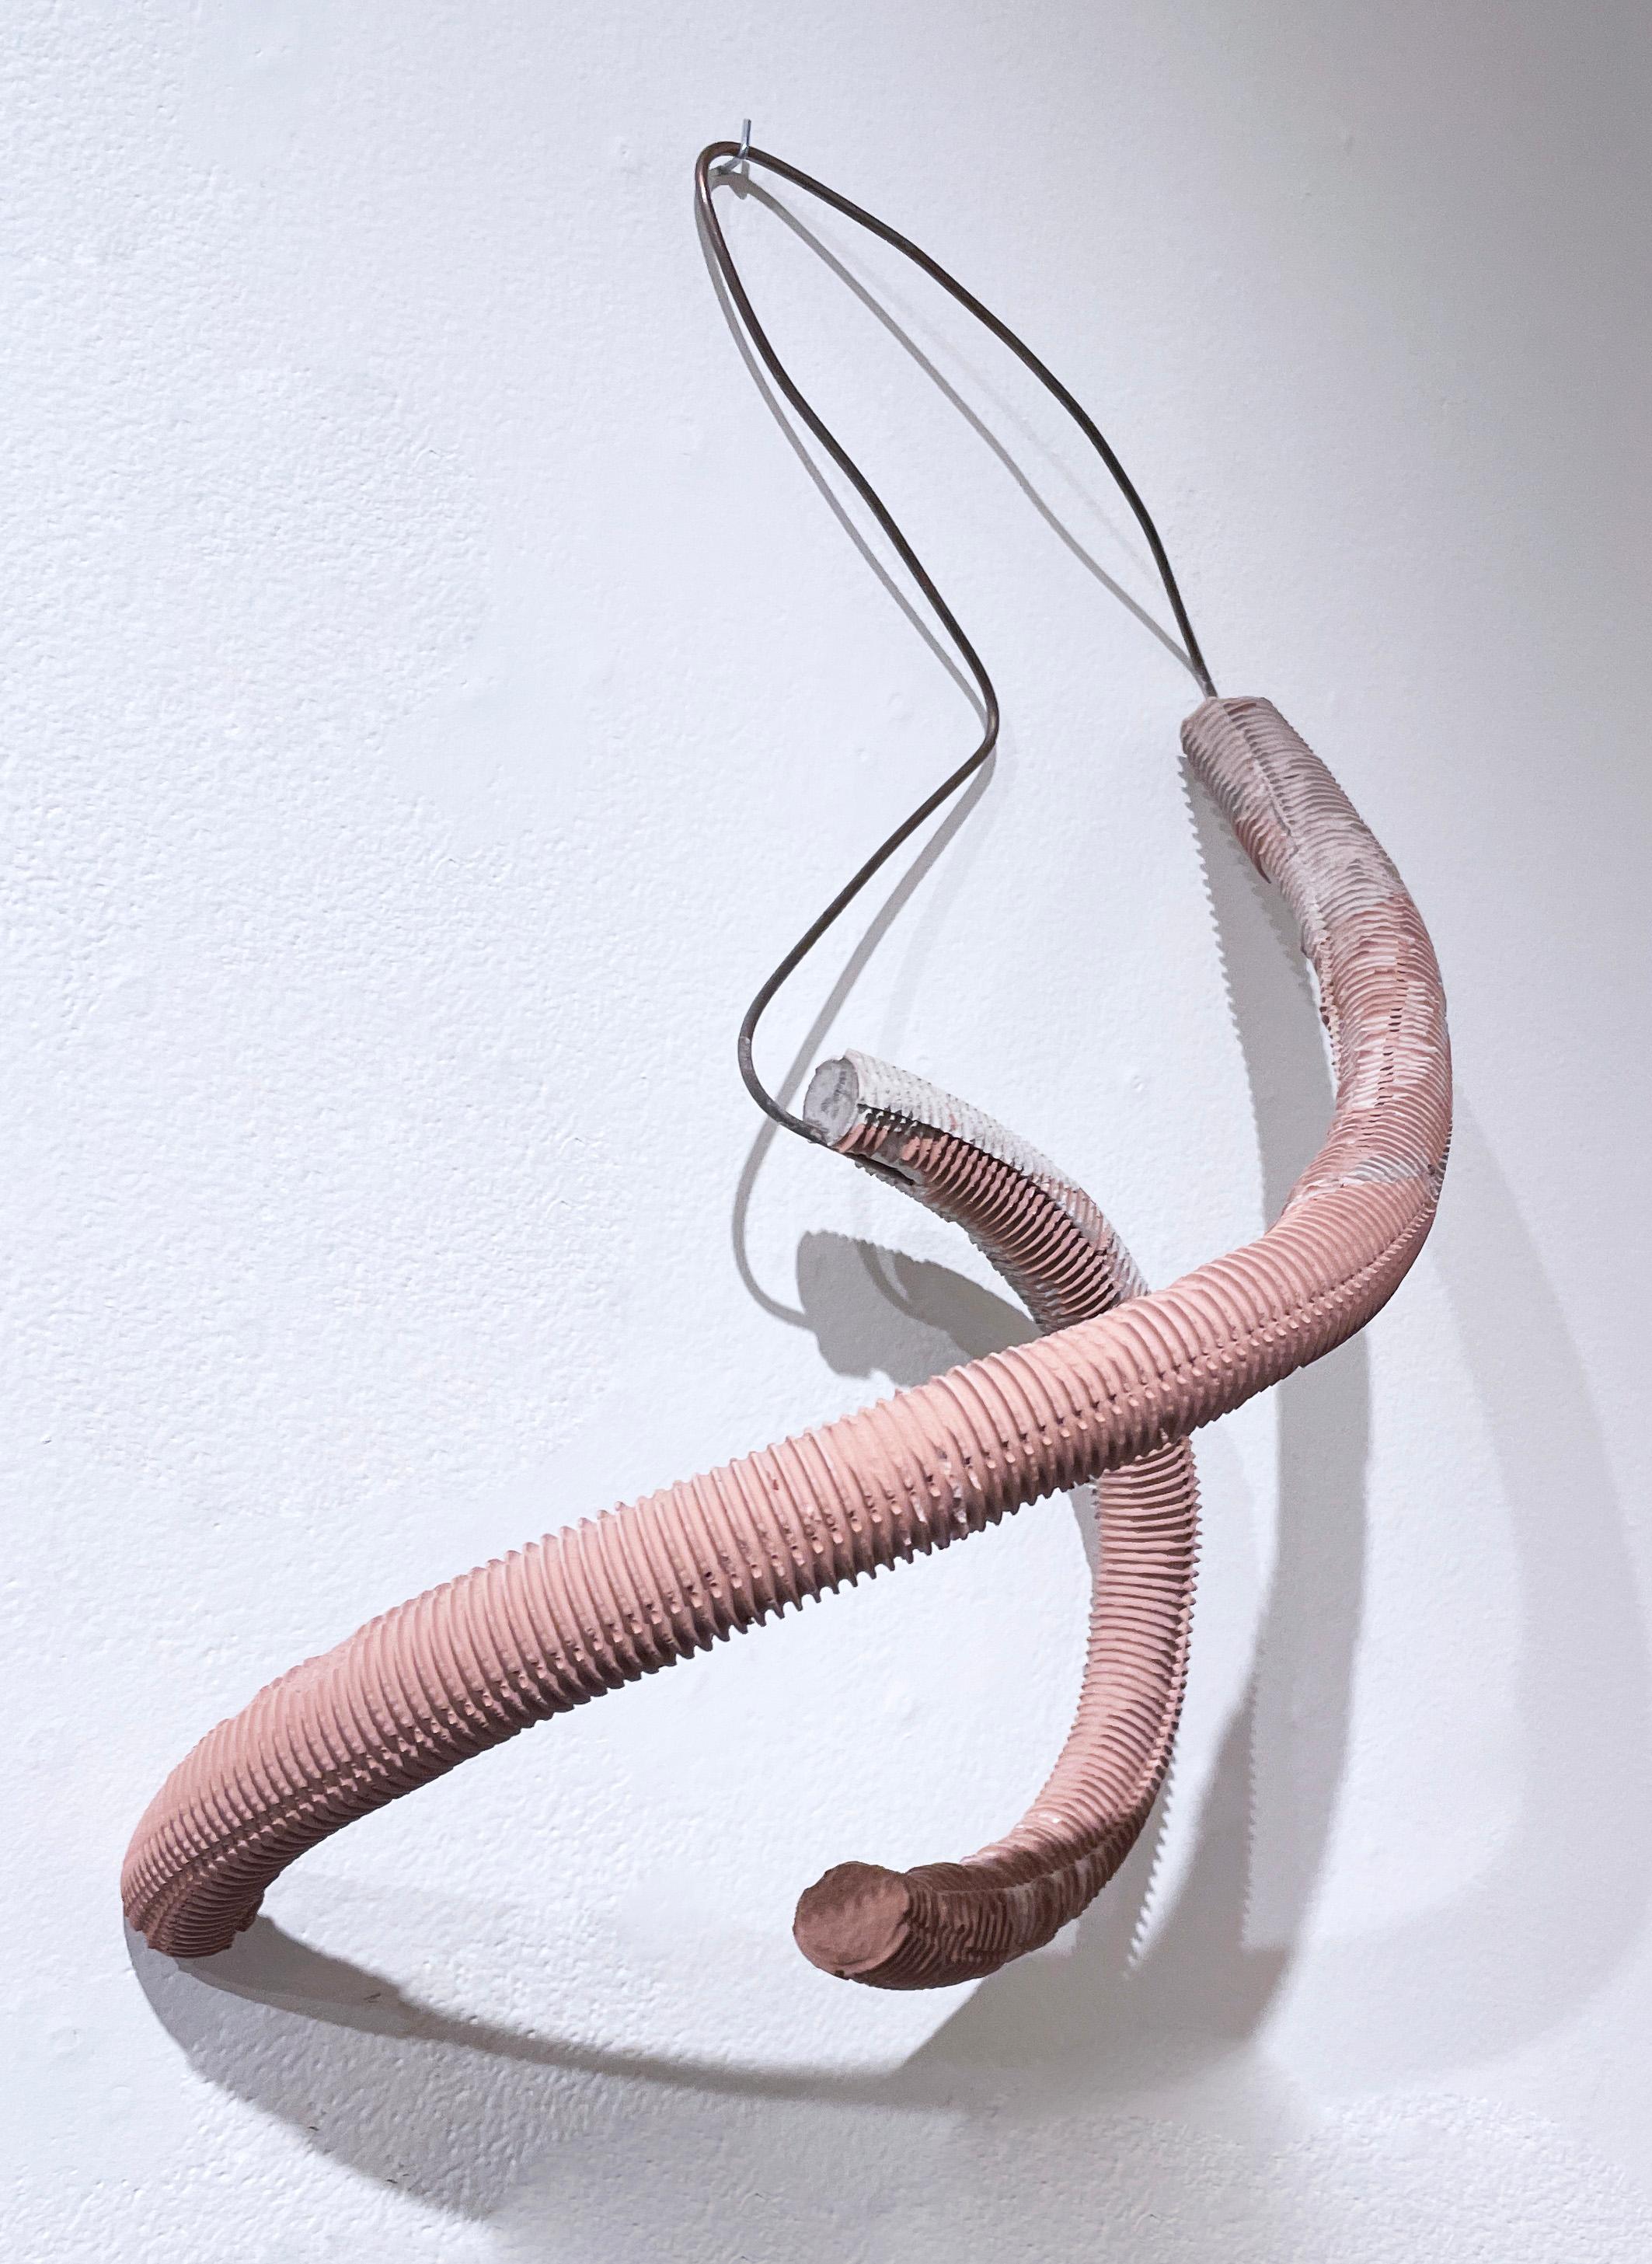 Dancing Wire Form (2022), terracotta concrete abstract sculpture, metal wire